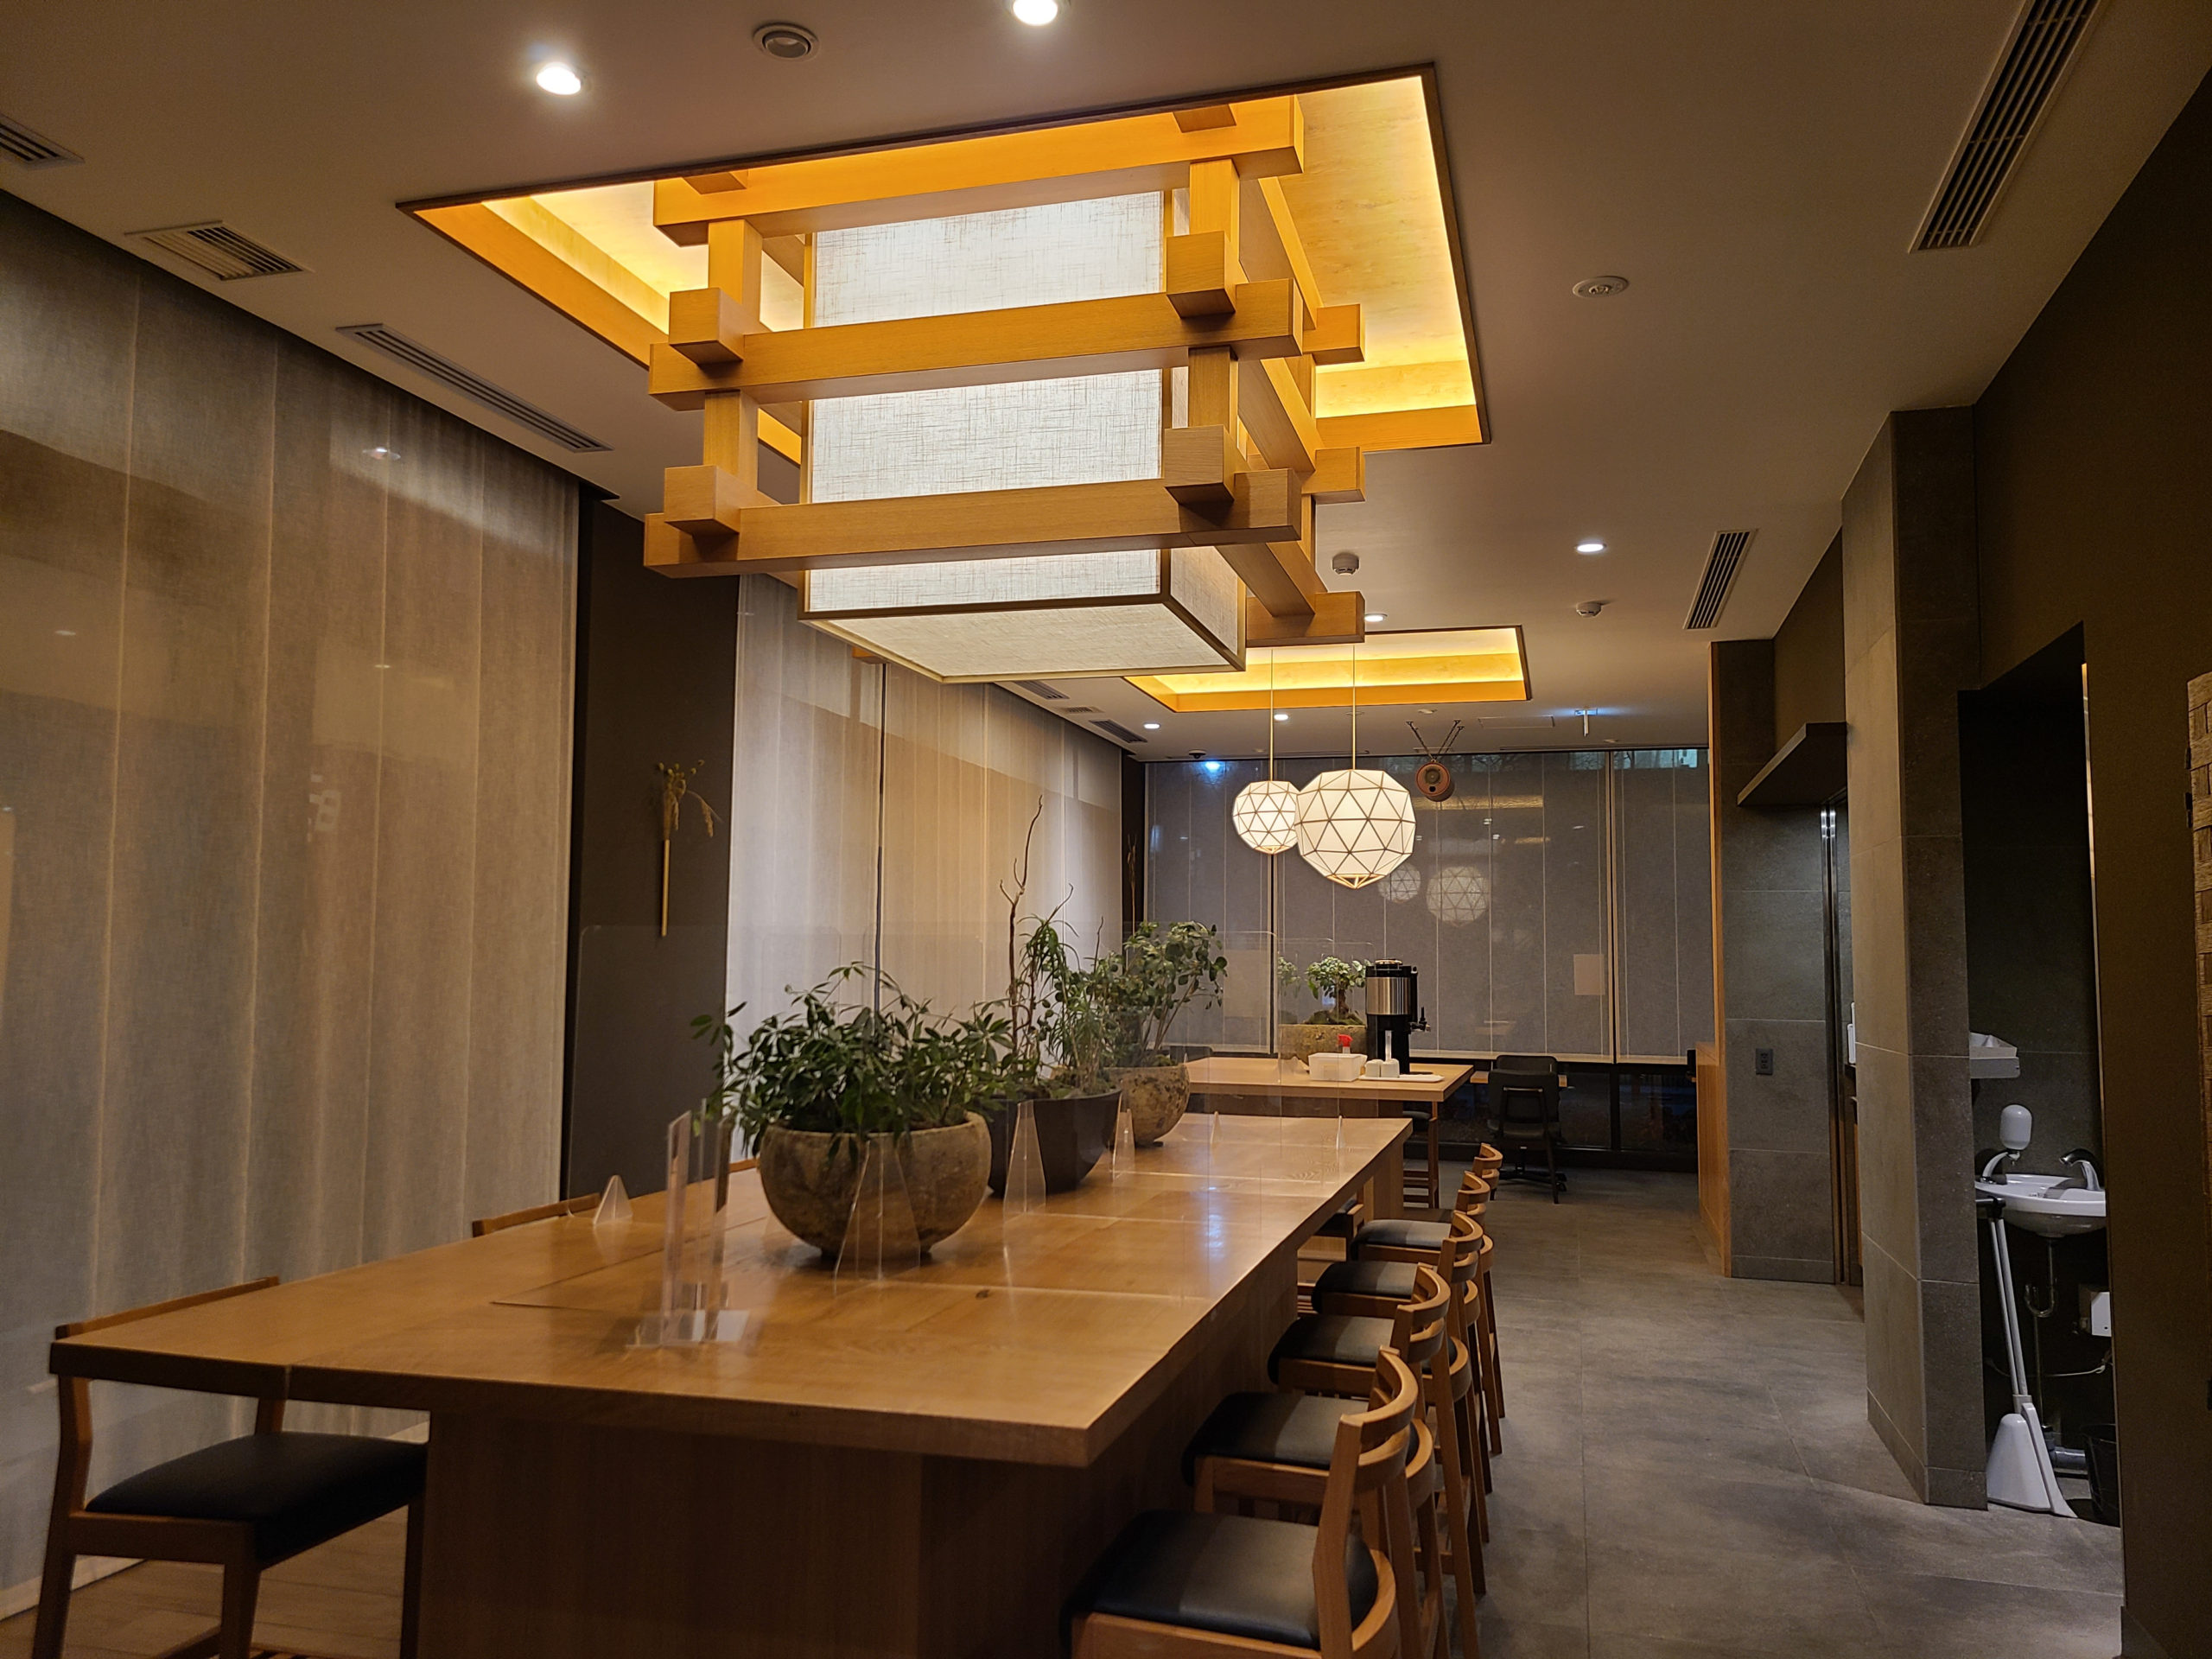 The restaurant displays traditional inspiration in its lighting fixtures